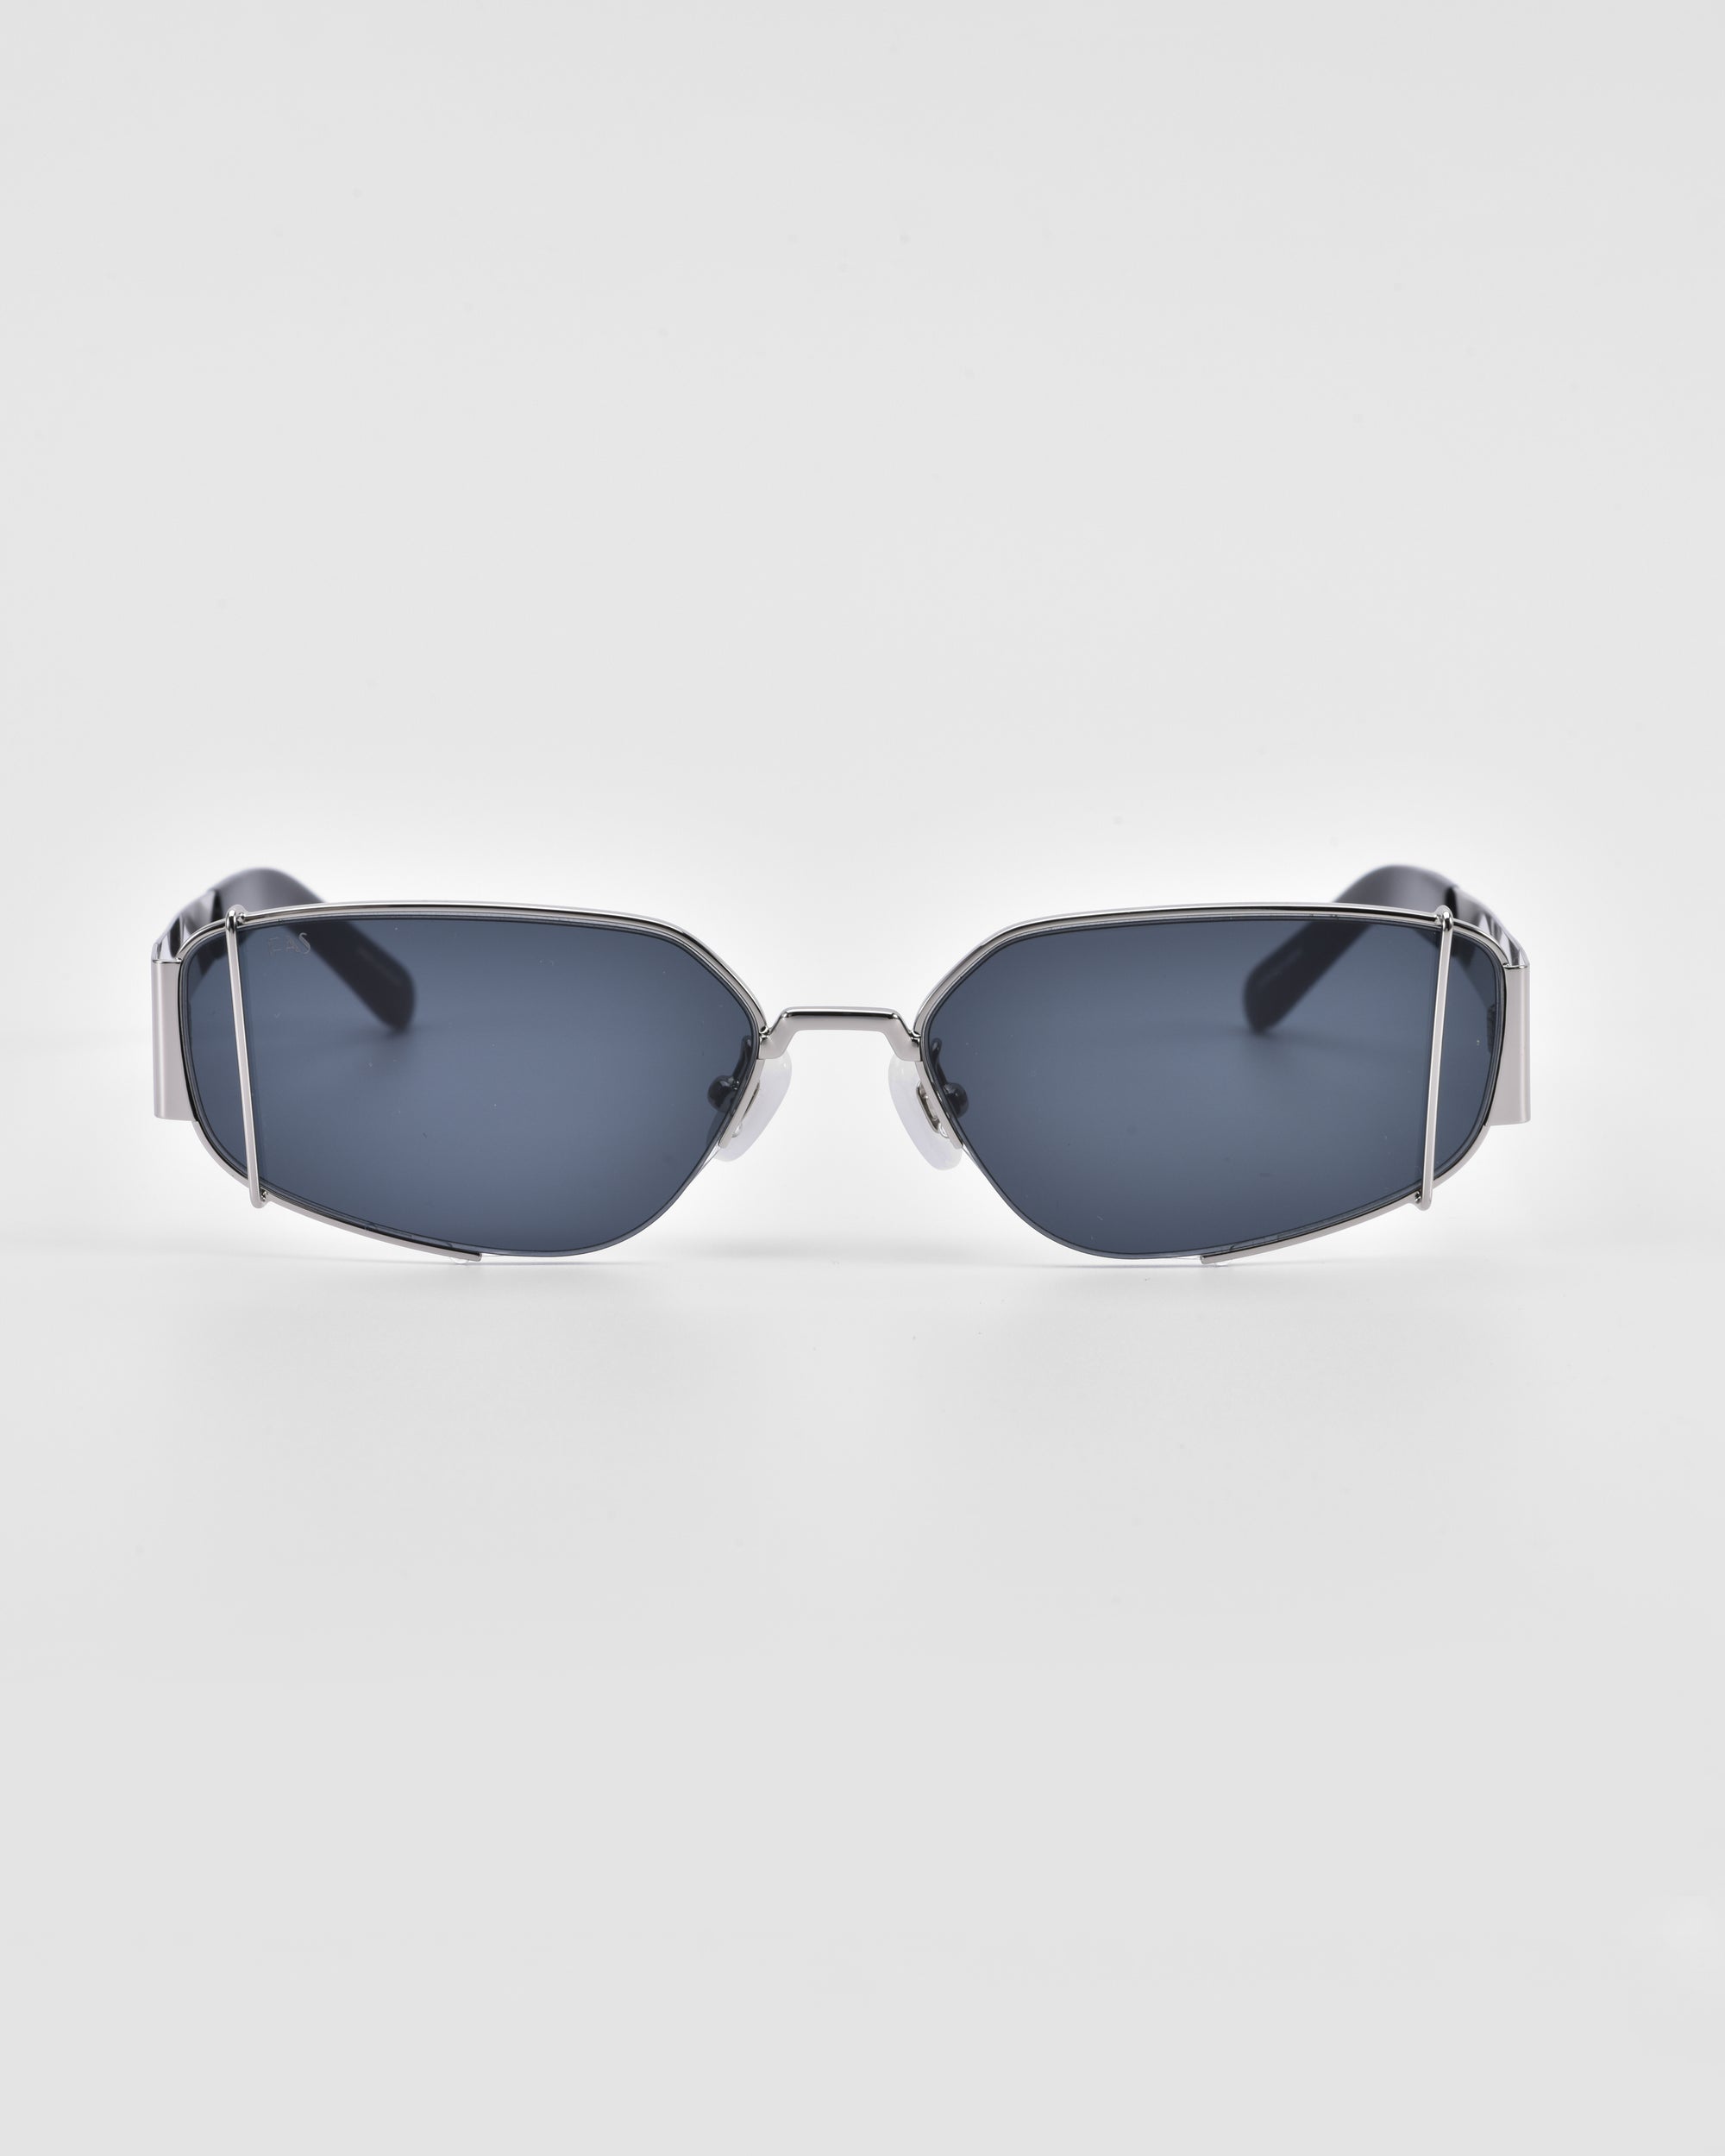 A pair of sleek, modern Talia sunglasses by For Art&#39;s Sake® with rectangular, dark-tinted lenses and thin 18-karat gold frames with an angular design, set against a plain white background.